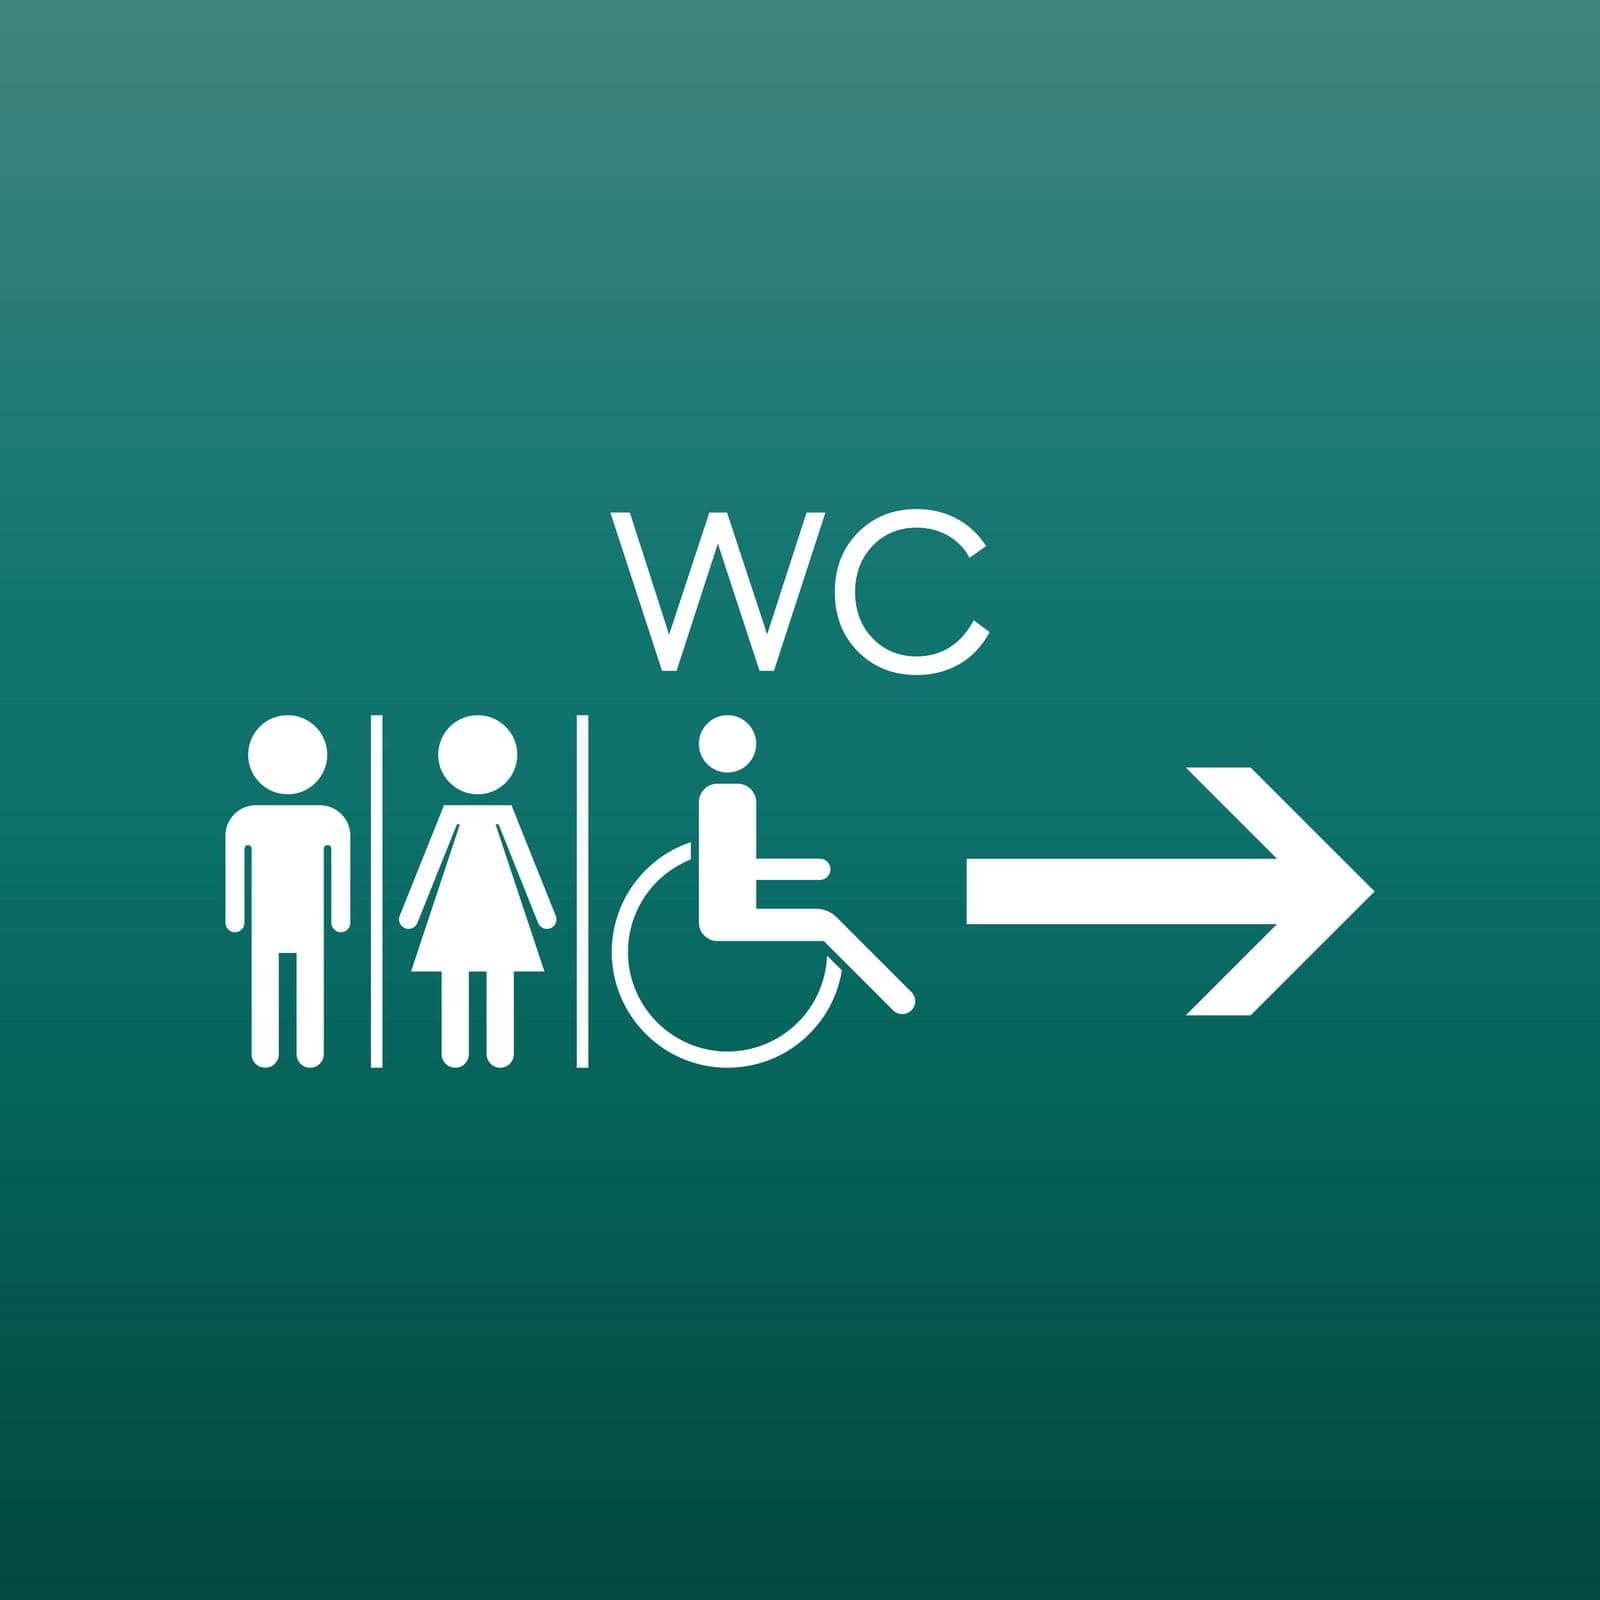 WC, toilet flat vector icon . Men and women sign for restroom on green background. by LysenkoA